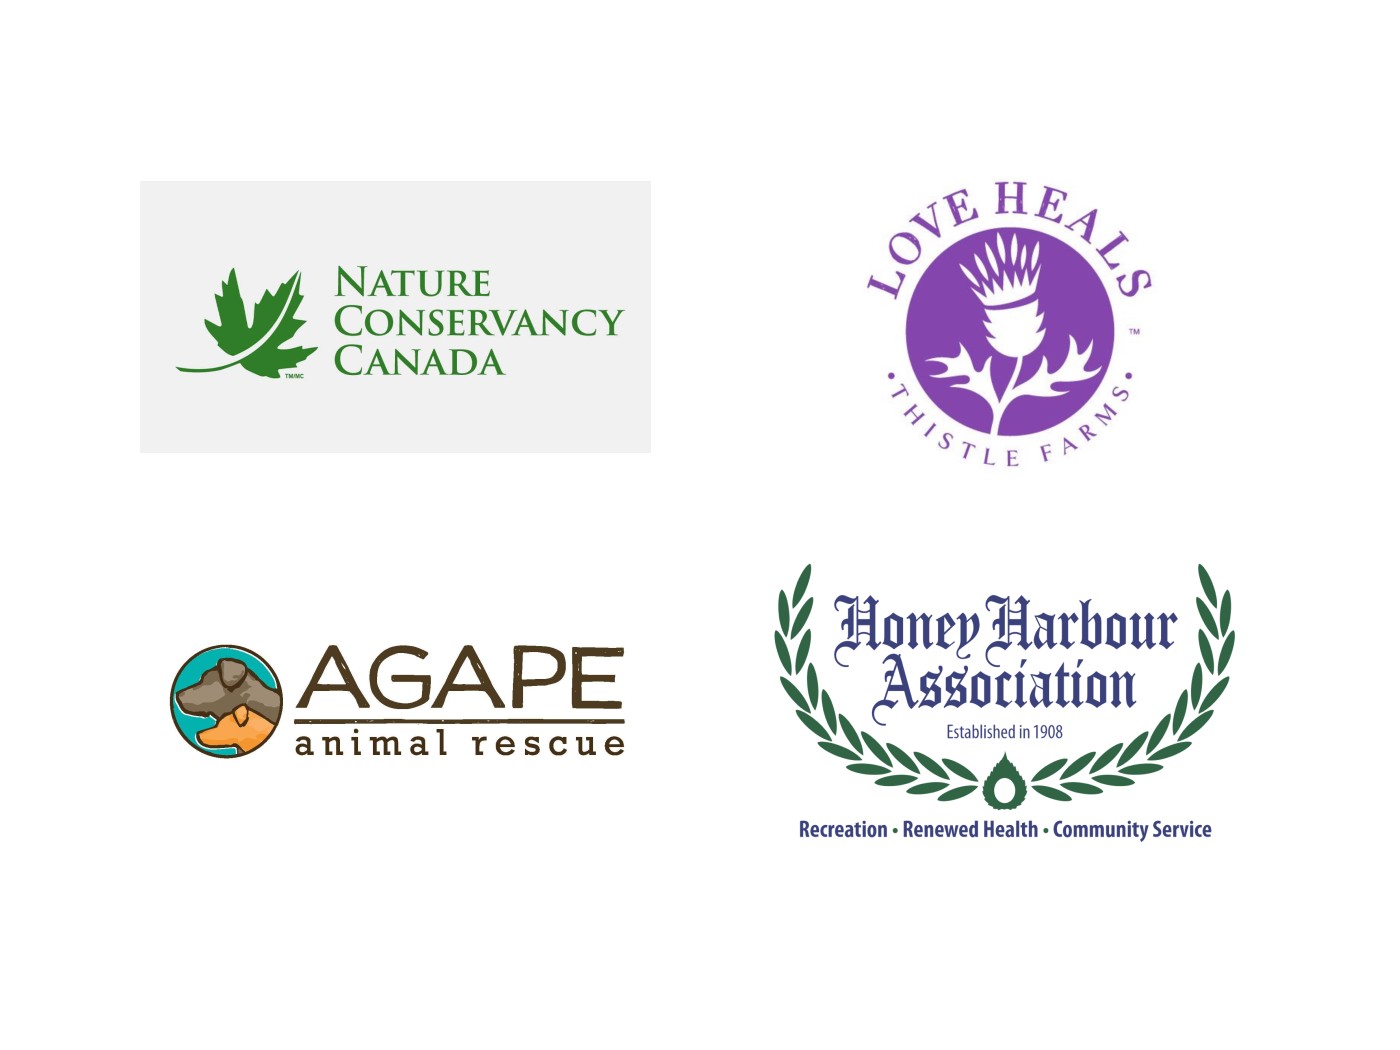 Logos of charities we've done work for: Nature Conservancy of Canada, Thistle Farms, Agape Animal Rescue, Honey Harbour Association